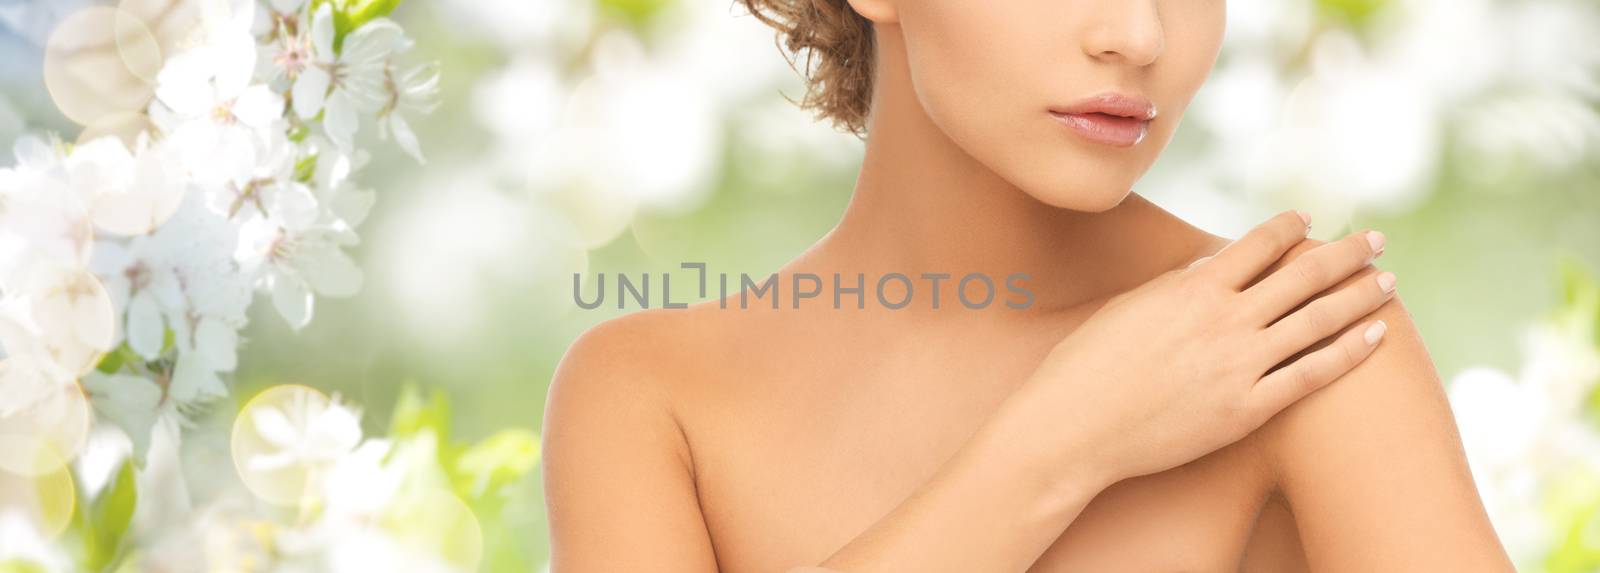 beauty, people and health concept - close up of beautiful young woman with bare shoulders over summer garden and cherry blossom background